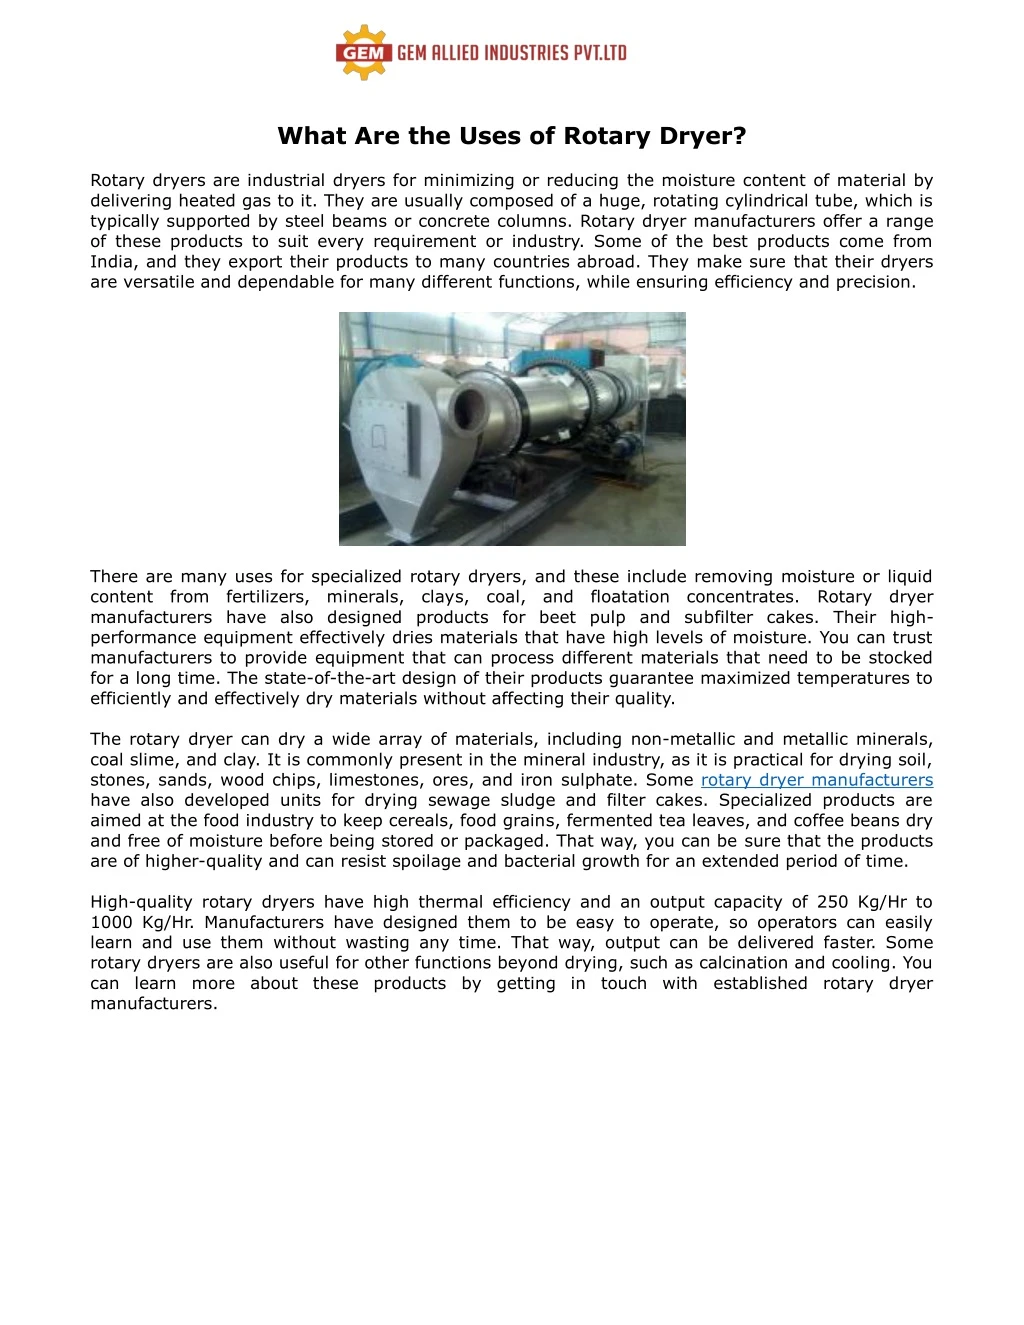 what are the uses of rotary dryer